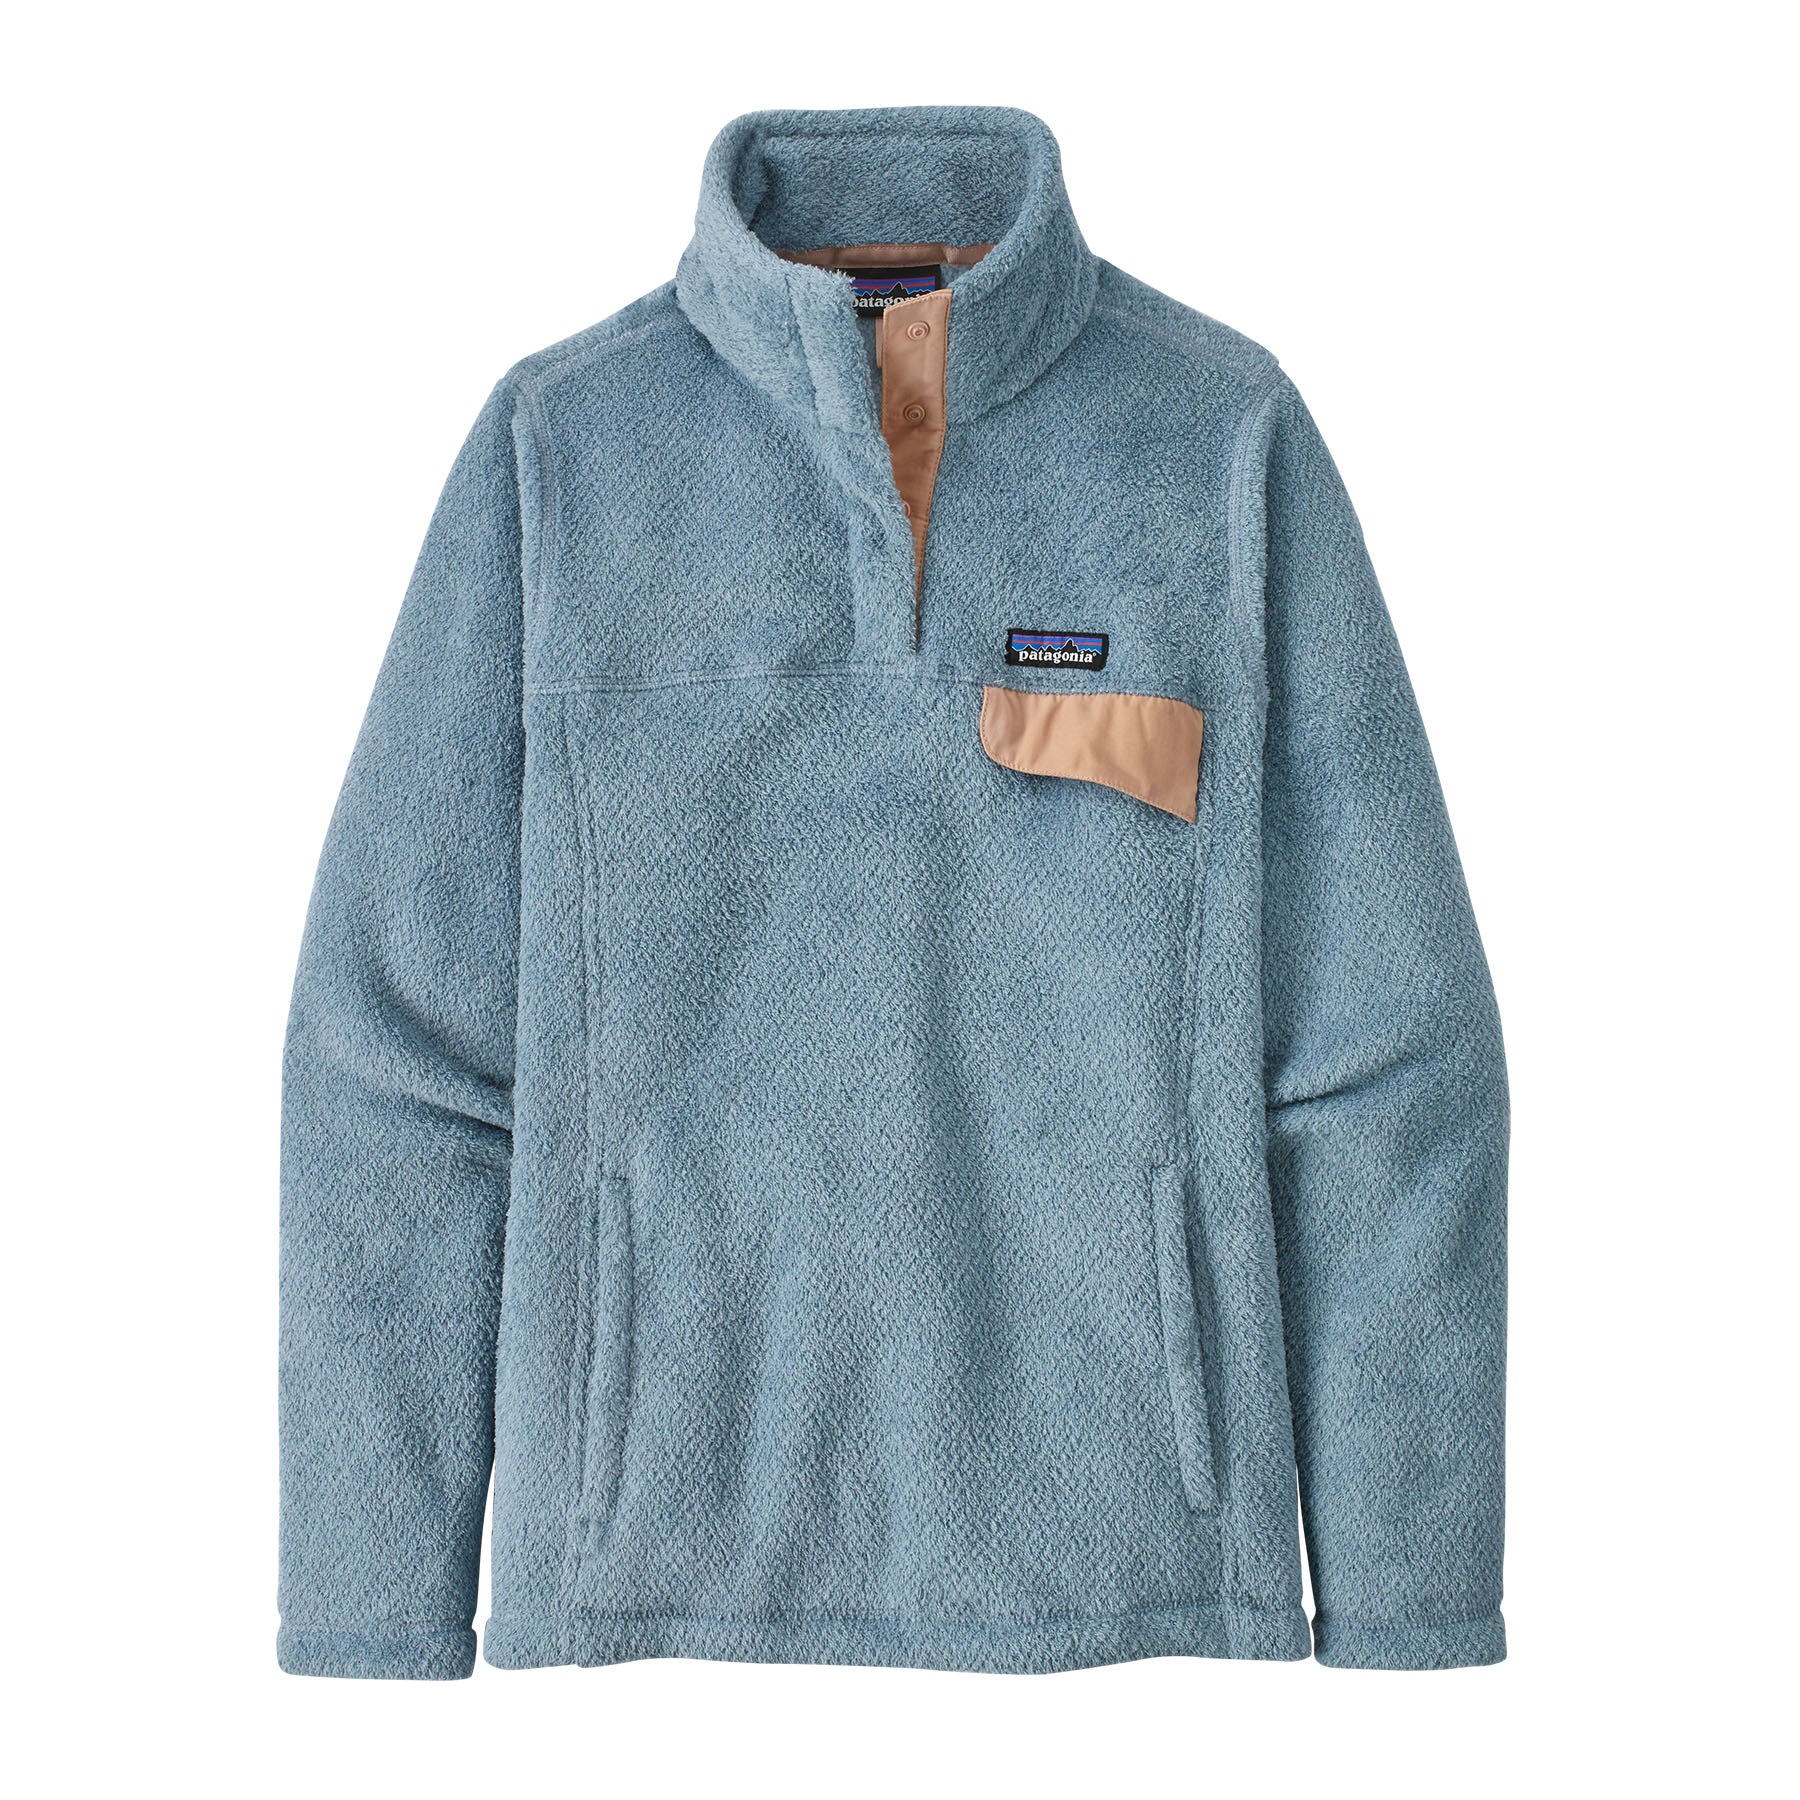 Patagonia Women's Re-Tool Snap-T® Fleece Pullover - Fall 2022